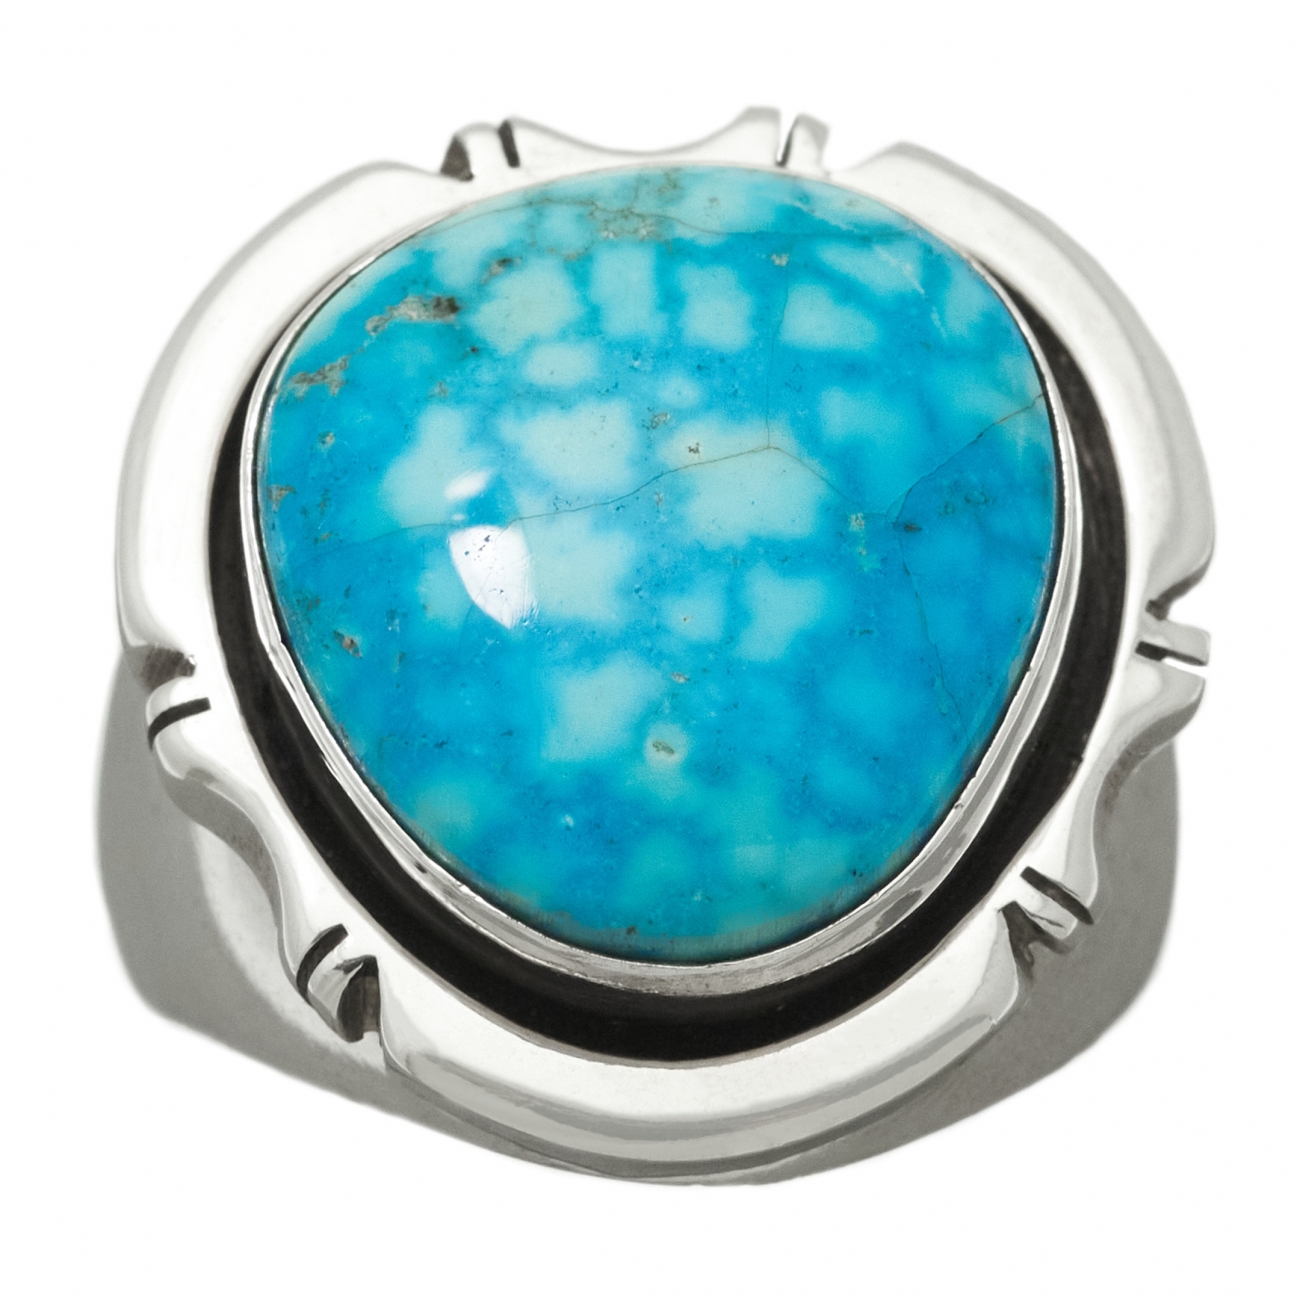 Navajo ring for men BA1009 in turquoise and silver - Harpo Paris